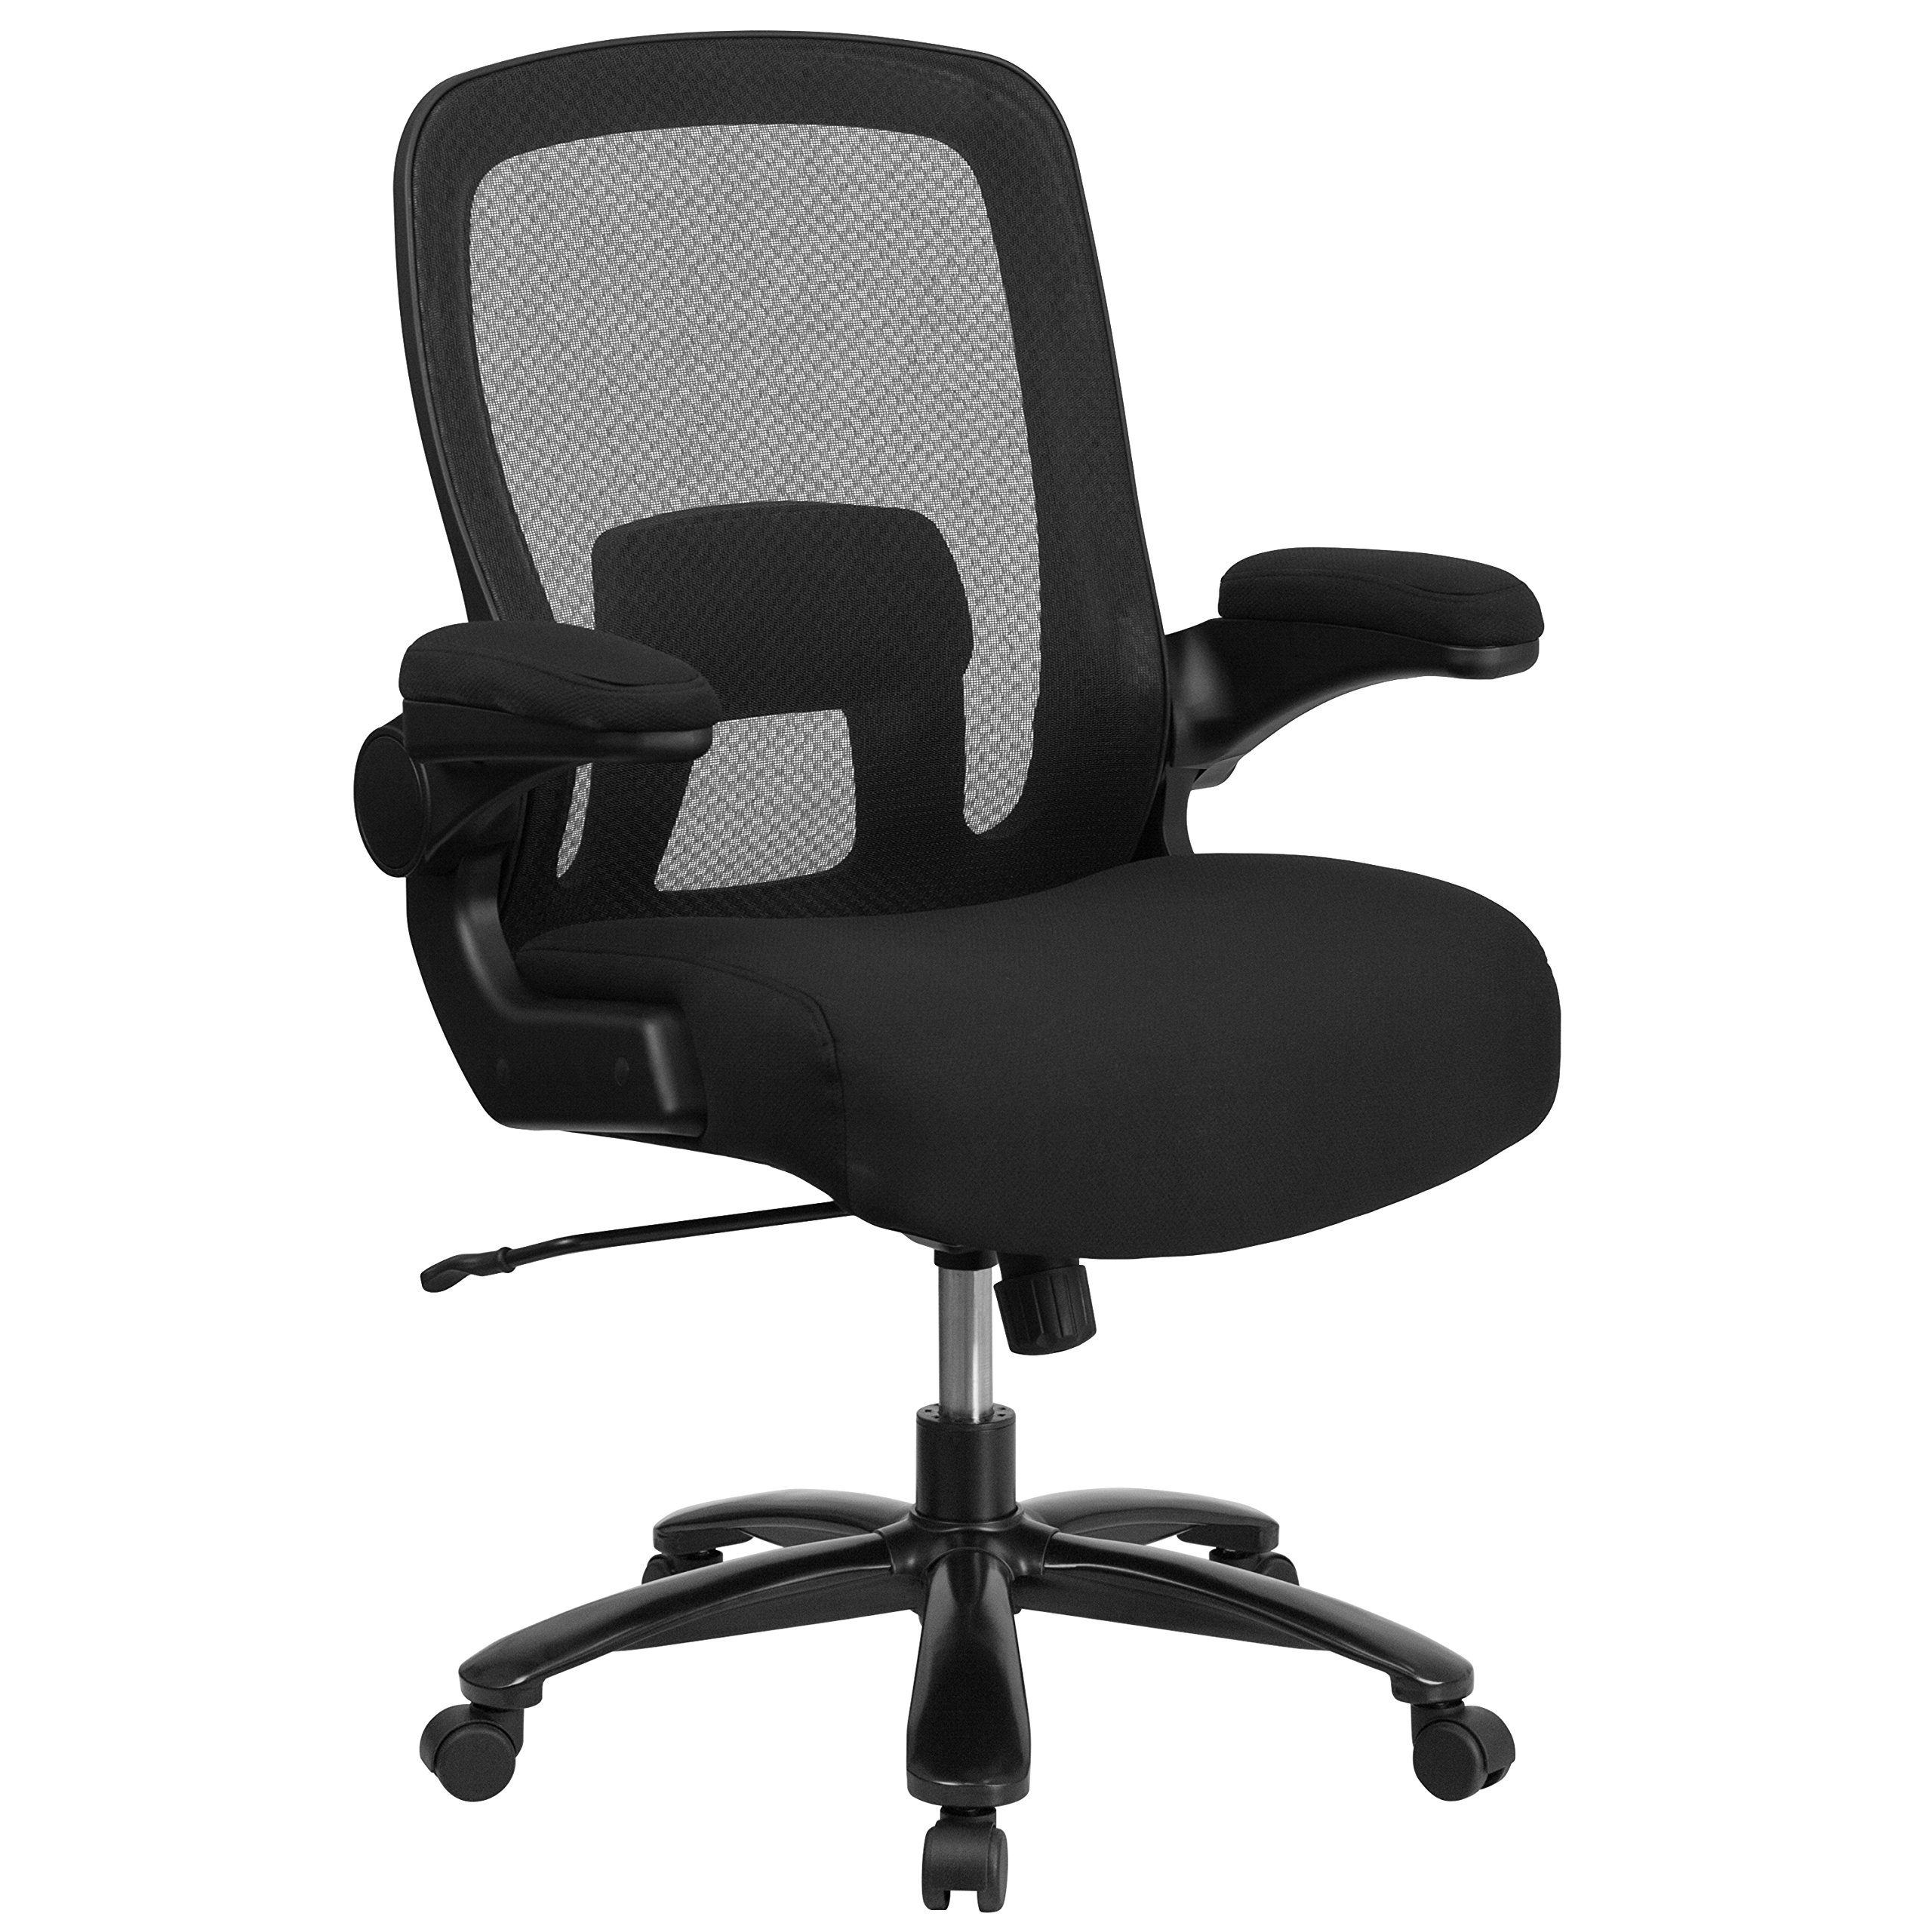 Flash Furniture HERCULES Series Big & Tall 500 lb. Rated Executive Swivel Chair with Fabric Seat and Adjustable Lumbar